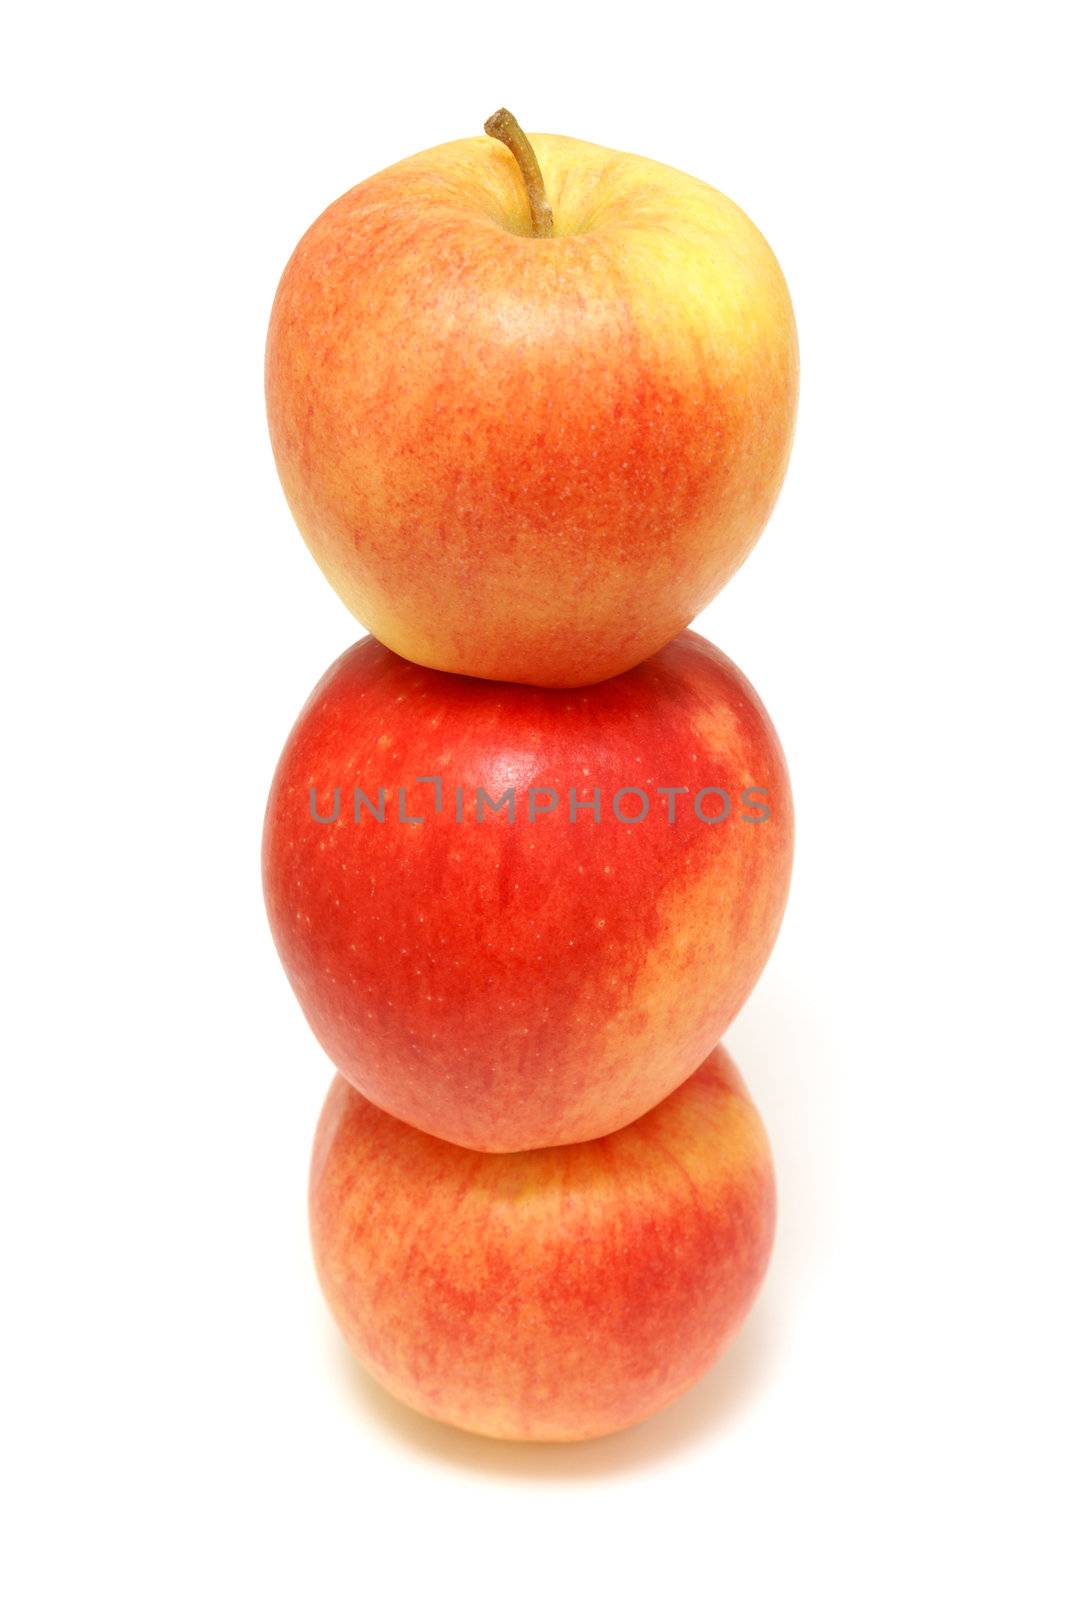 Three red apples stacked on top of each other.